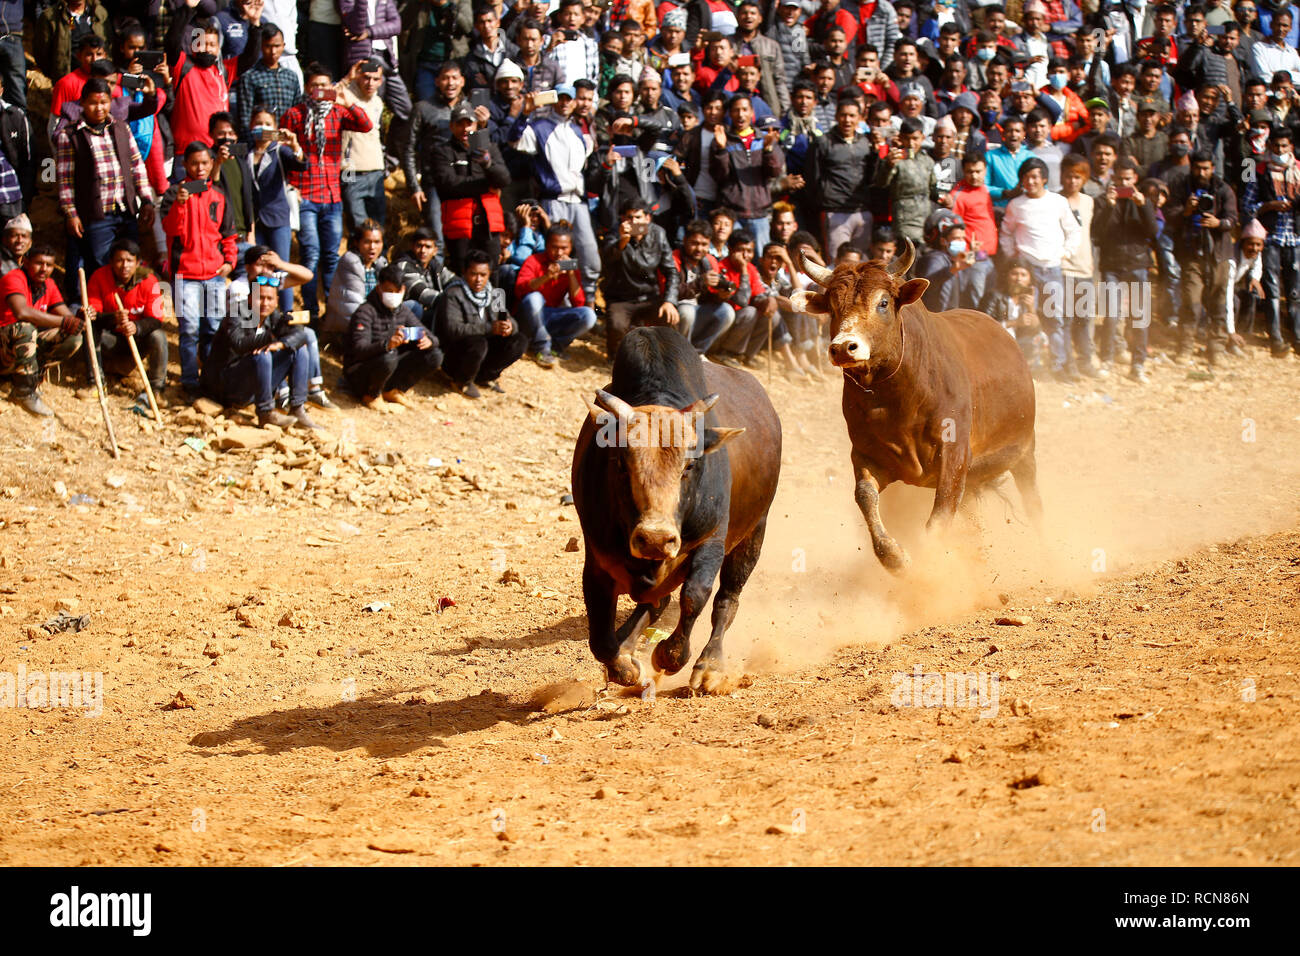 Bulls seen running after each other during the festival organized to mark Maghe Sangranti or Makar Sankranti festival. Thousands of people gathered at an open ground of Taruka village at Nuwakot district to witness a bull fighting festival that heralds the end of winter, according to the Hindu calendar. Stock Photo